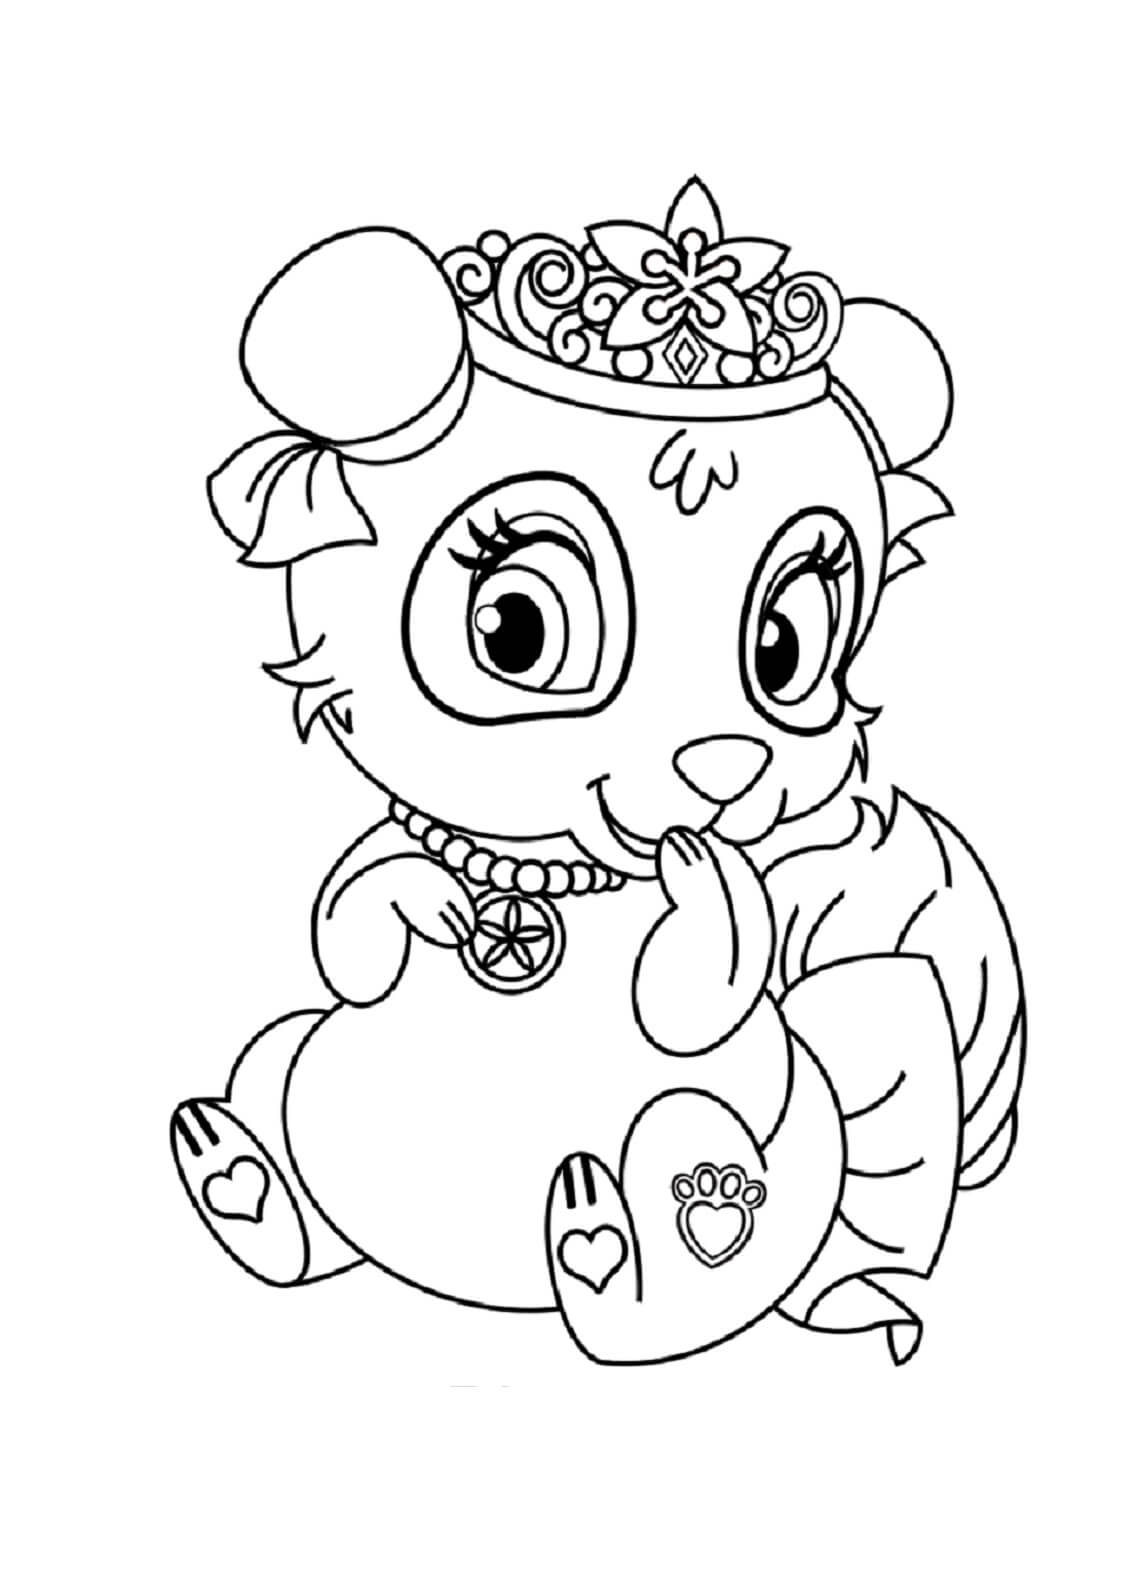 Palace Pets Blossom coloring page - Download, Print or Color Online for ...